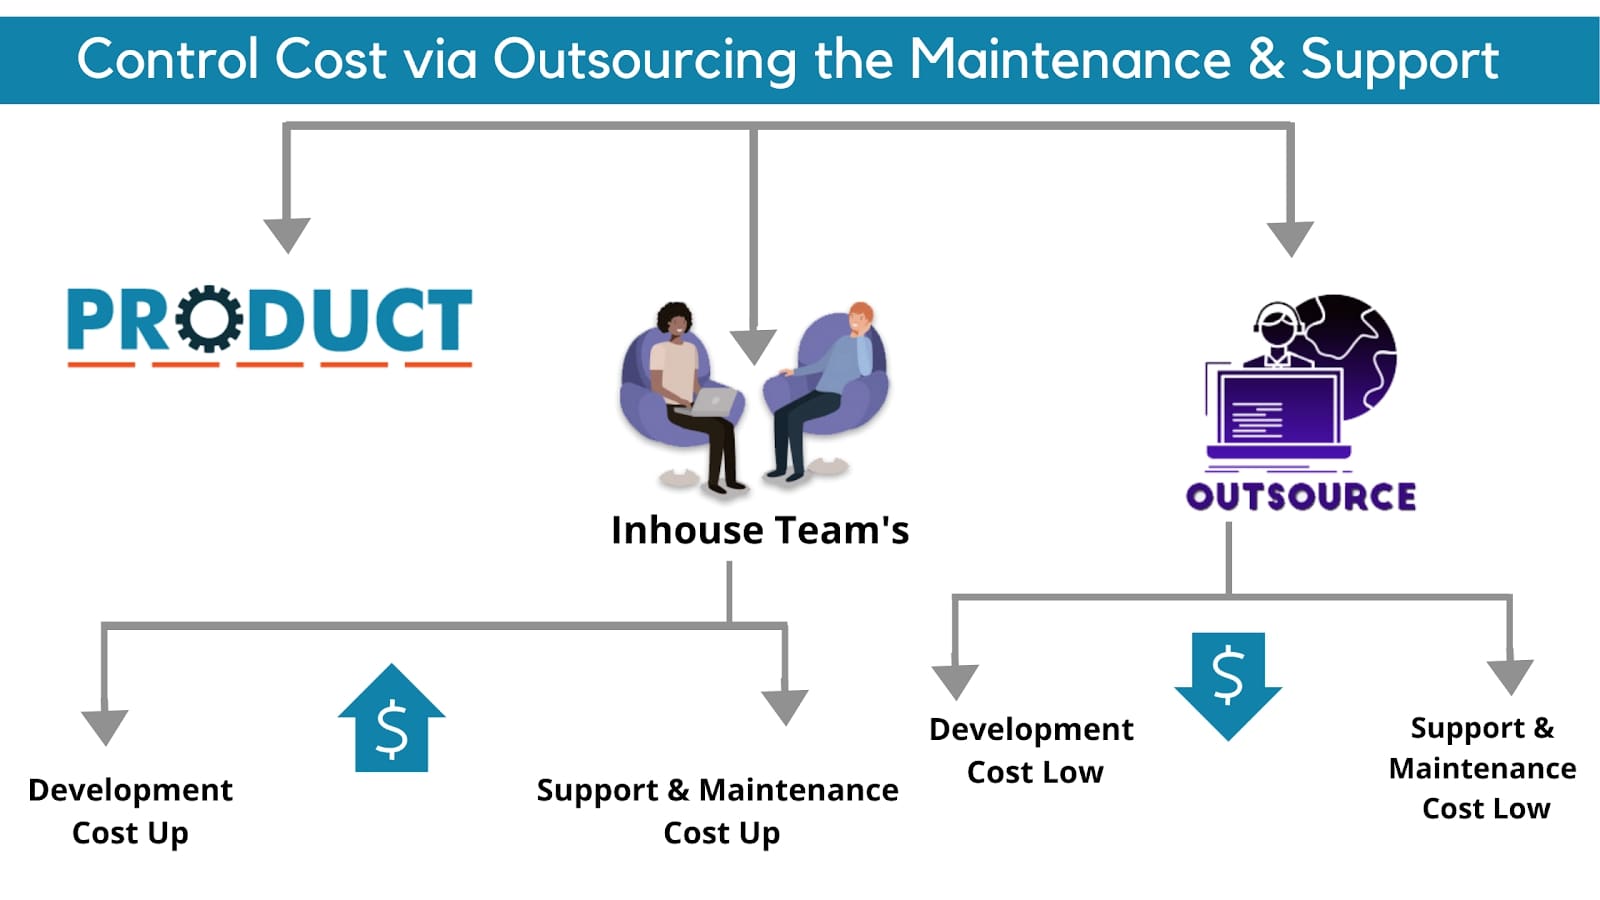 Control Cost Via Outsourcing